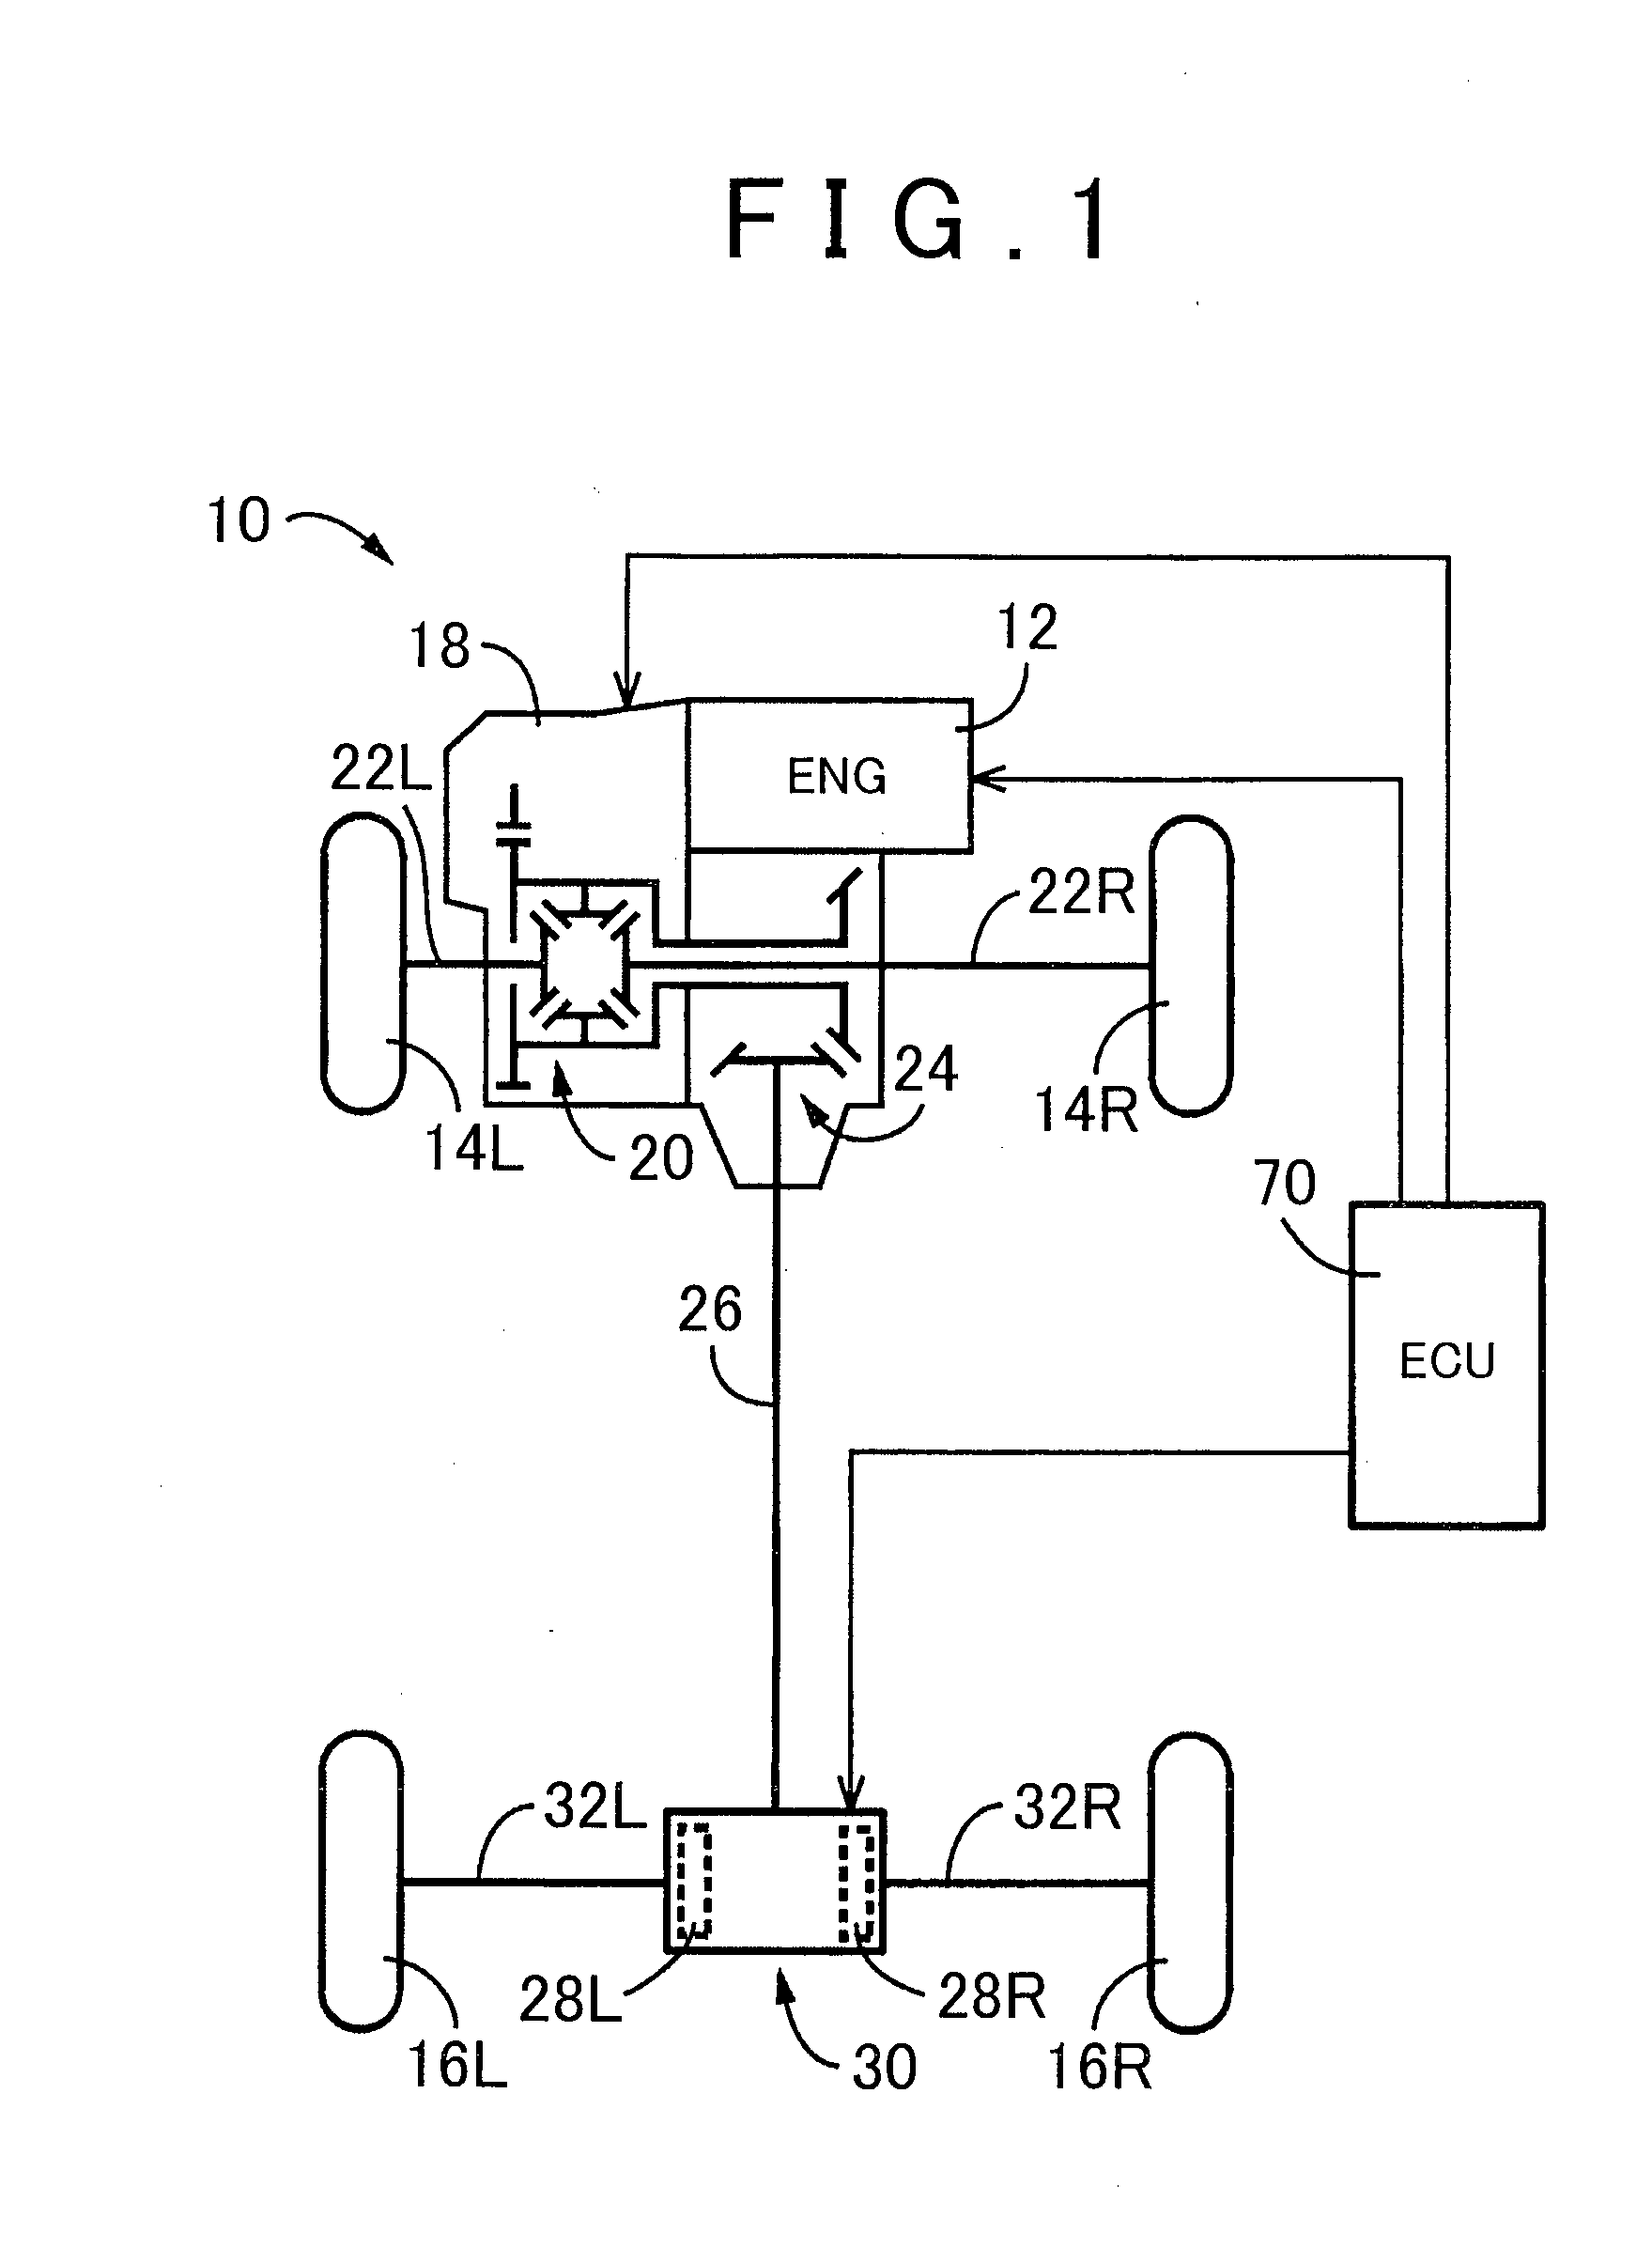 Display control system for vehicle